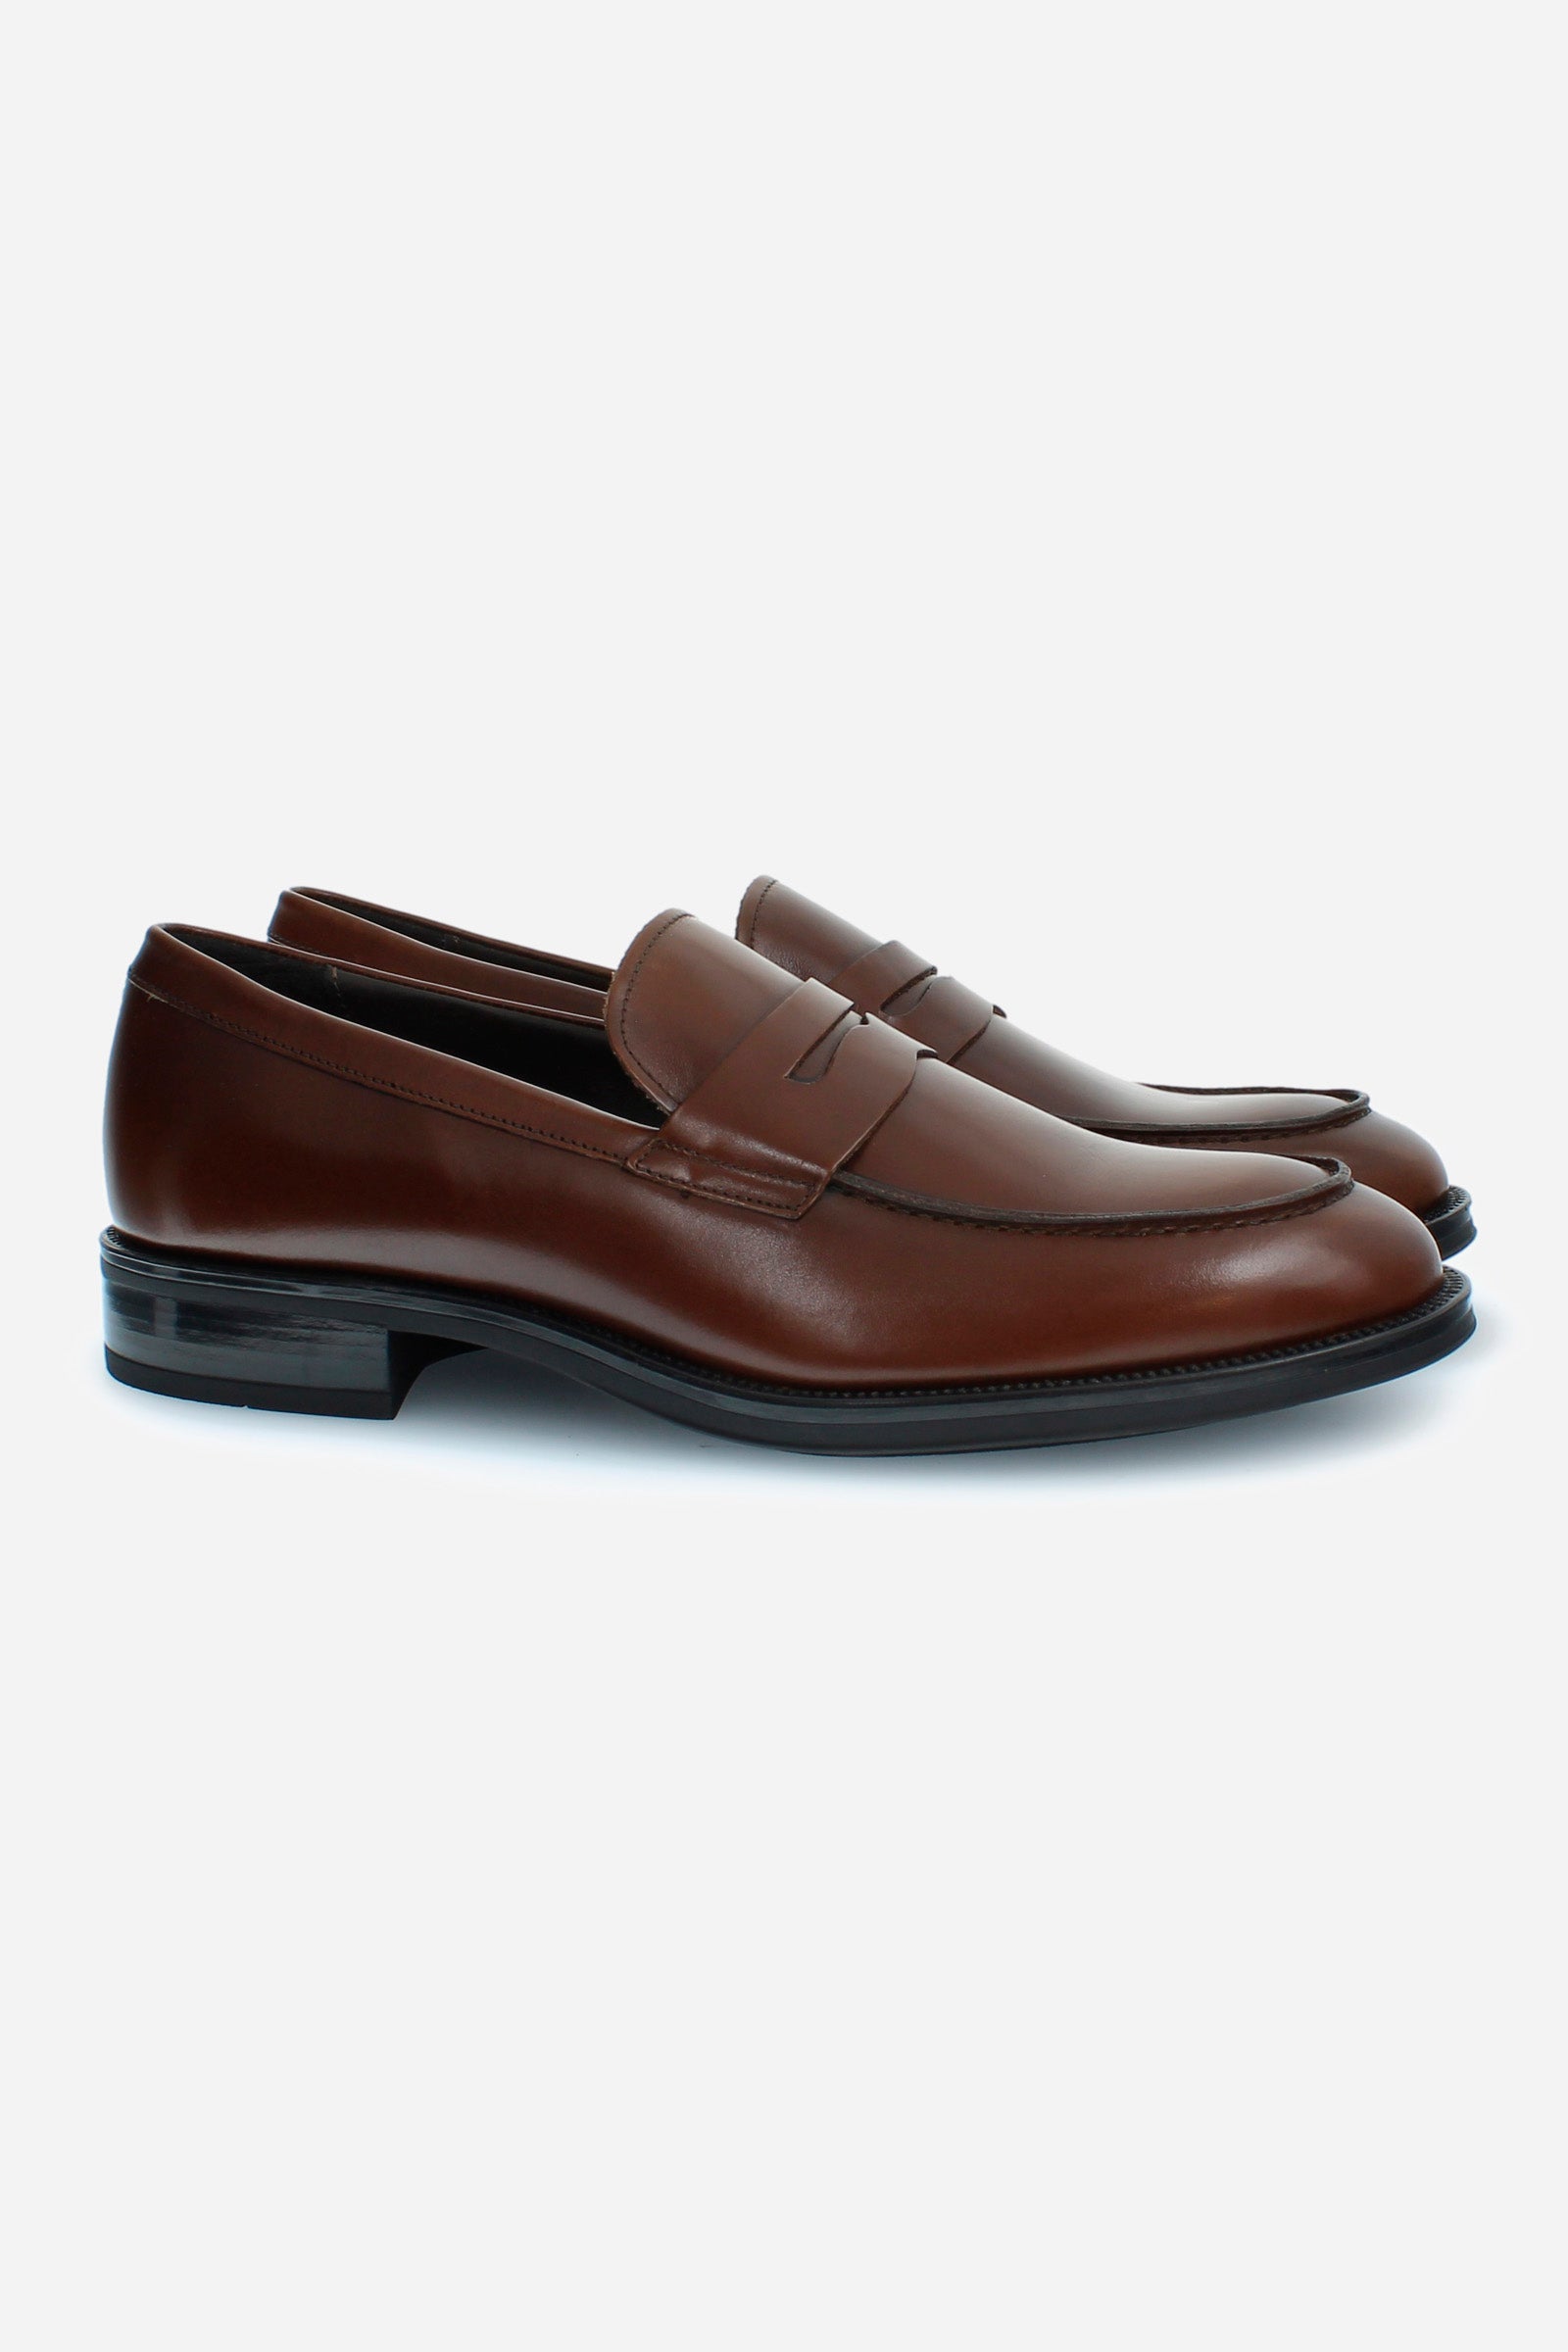 Men's college loafers in leather